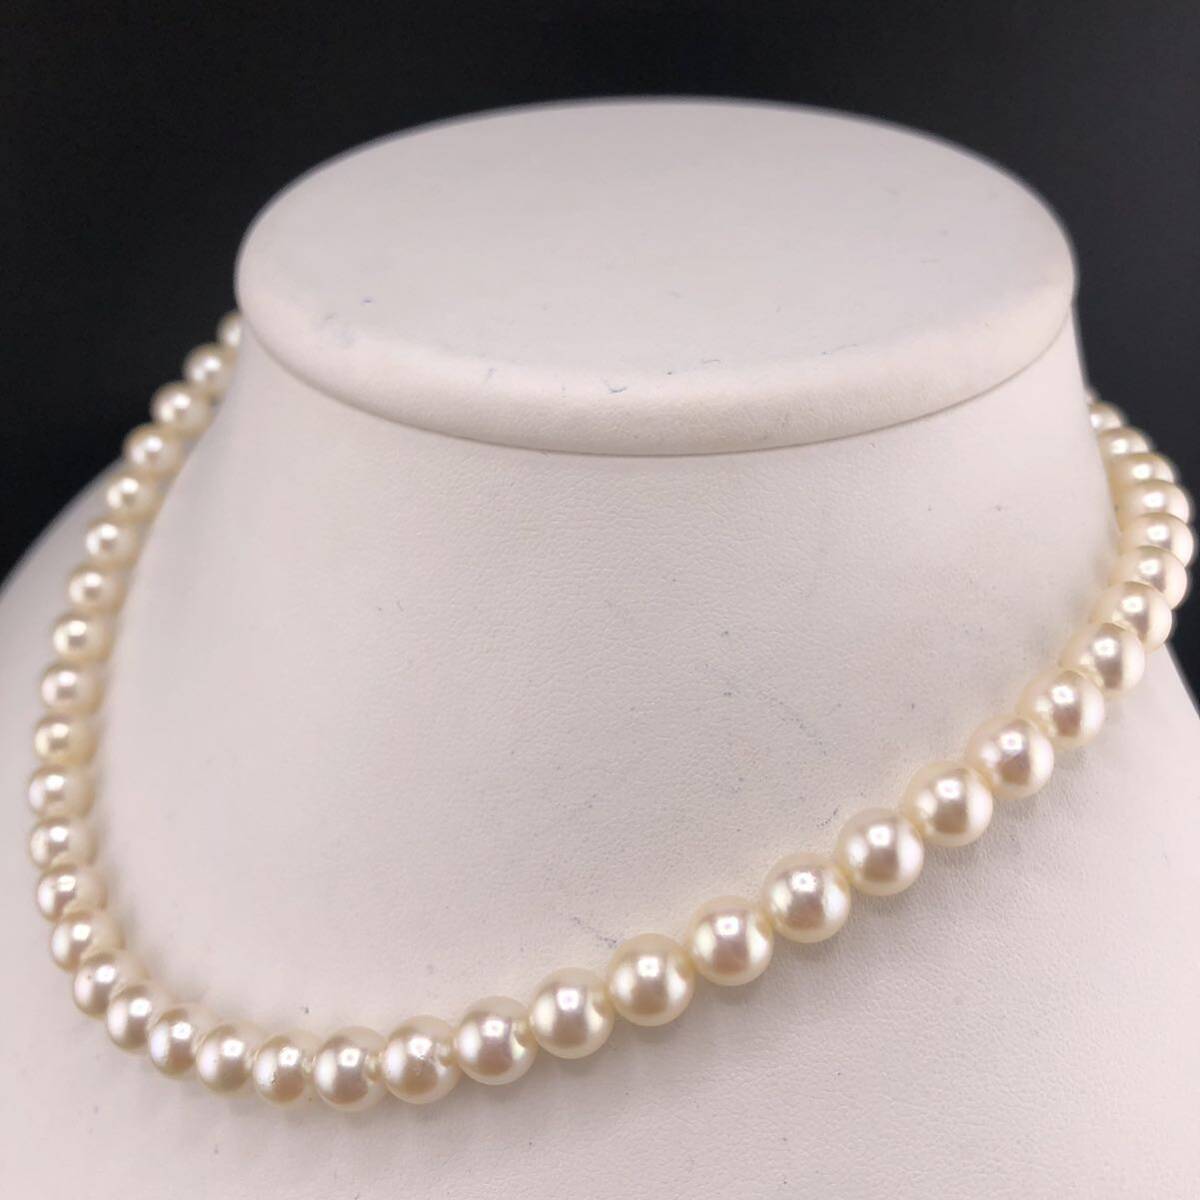 E05-3273 アコヤパールネックレス 7.0mm~7.5mm 39cm 31.8g ( アコヤ真珠 Pearl necklace SILVER )_画像2